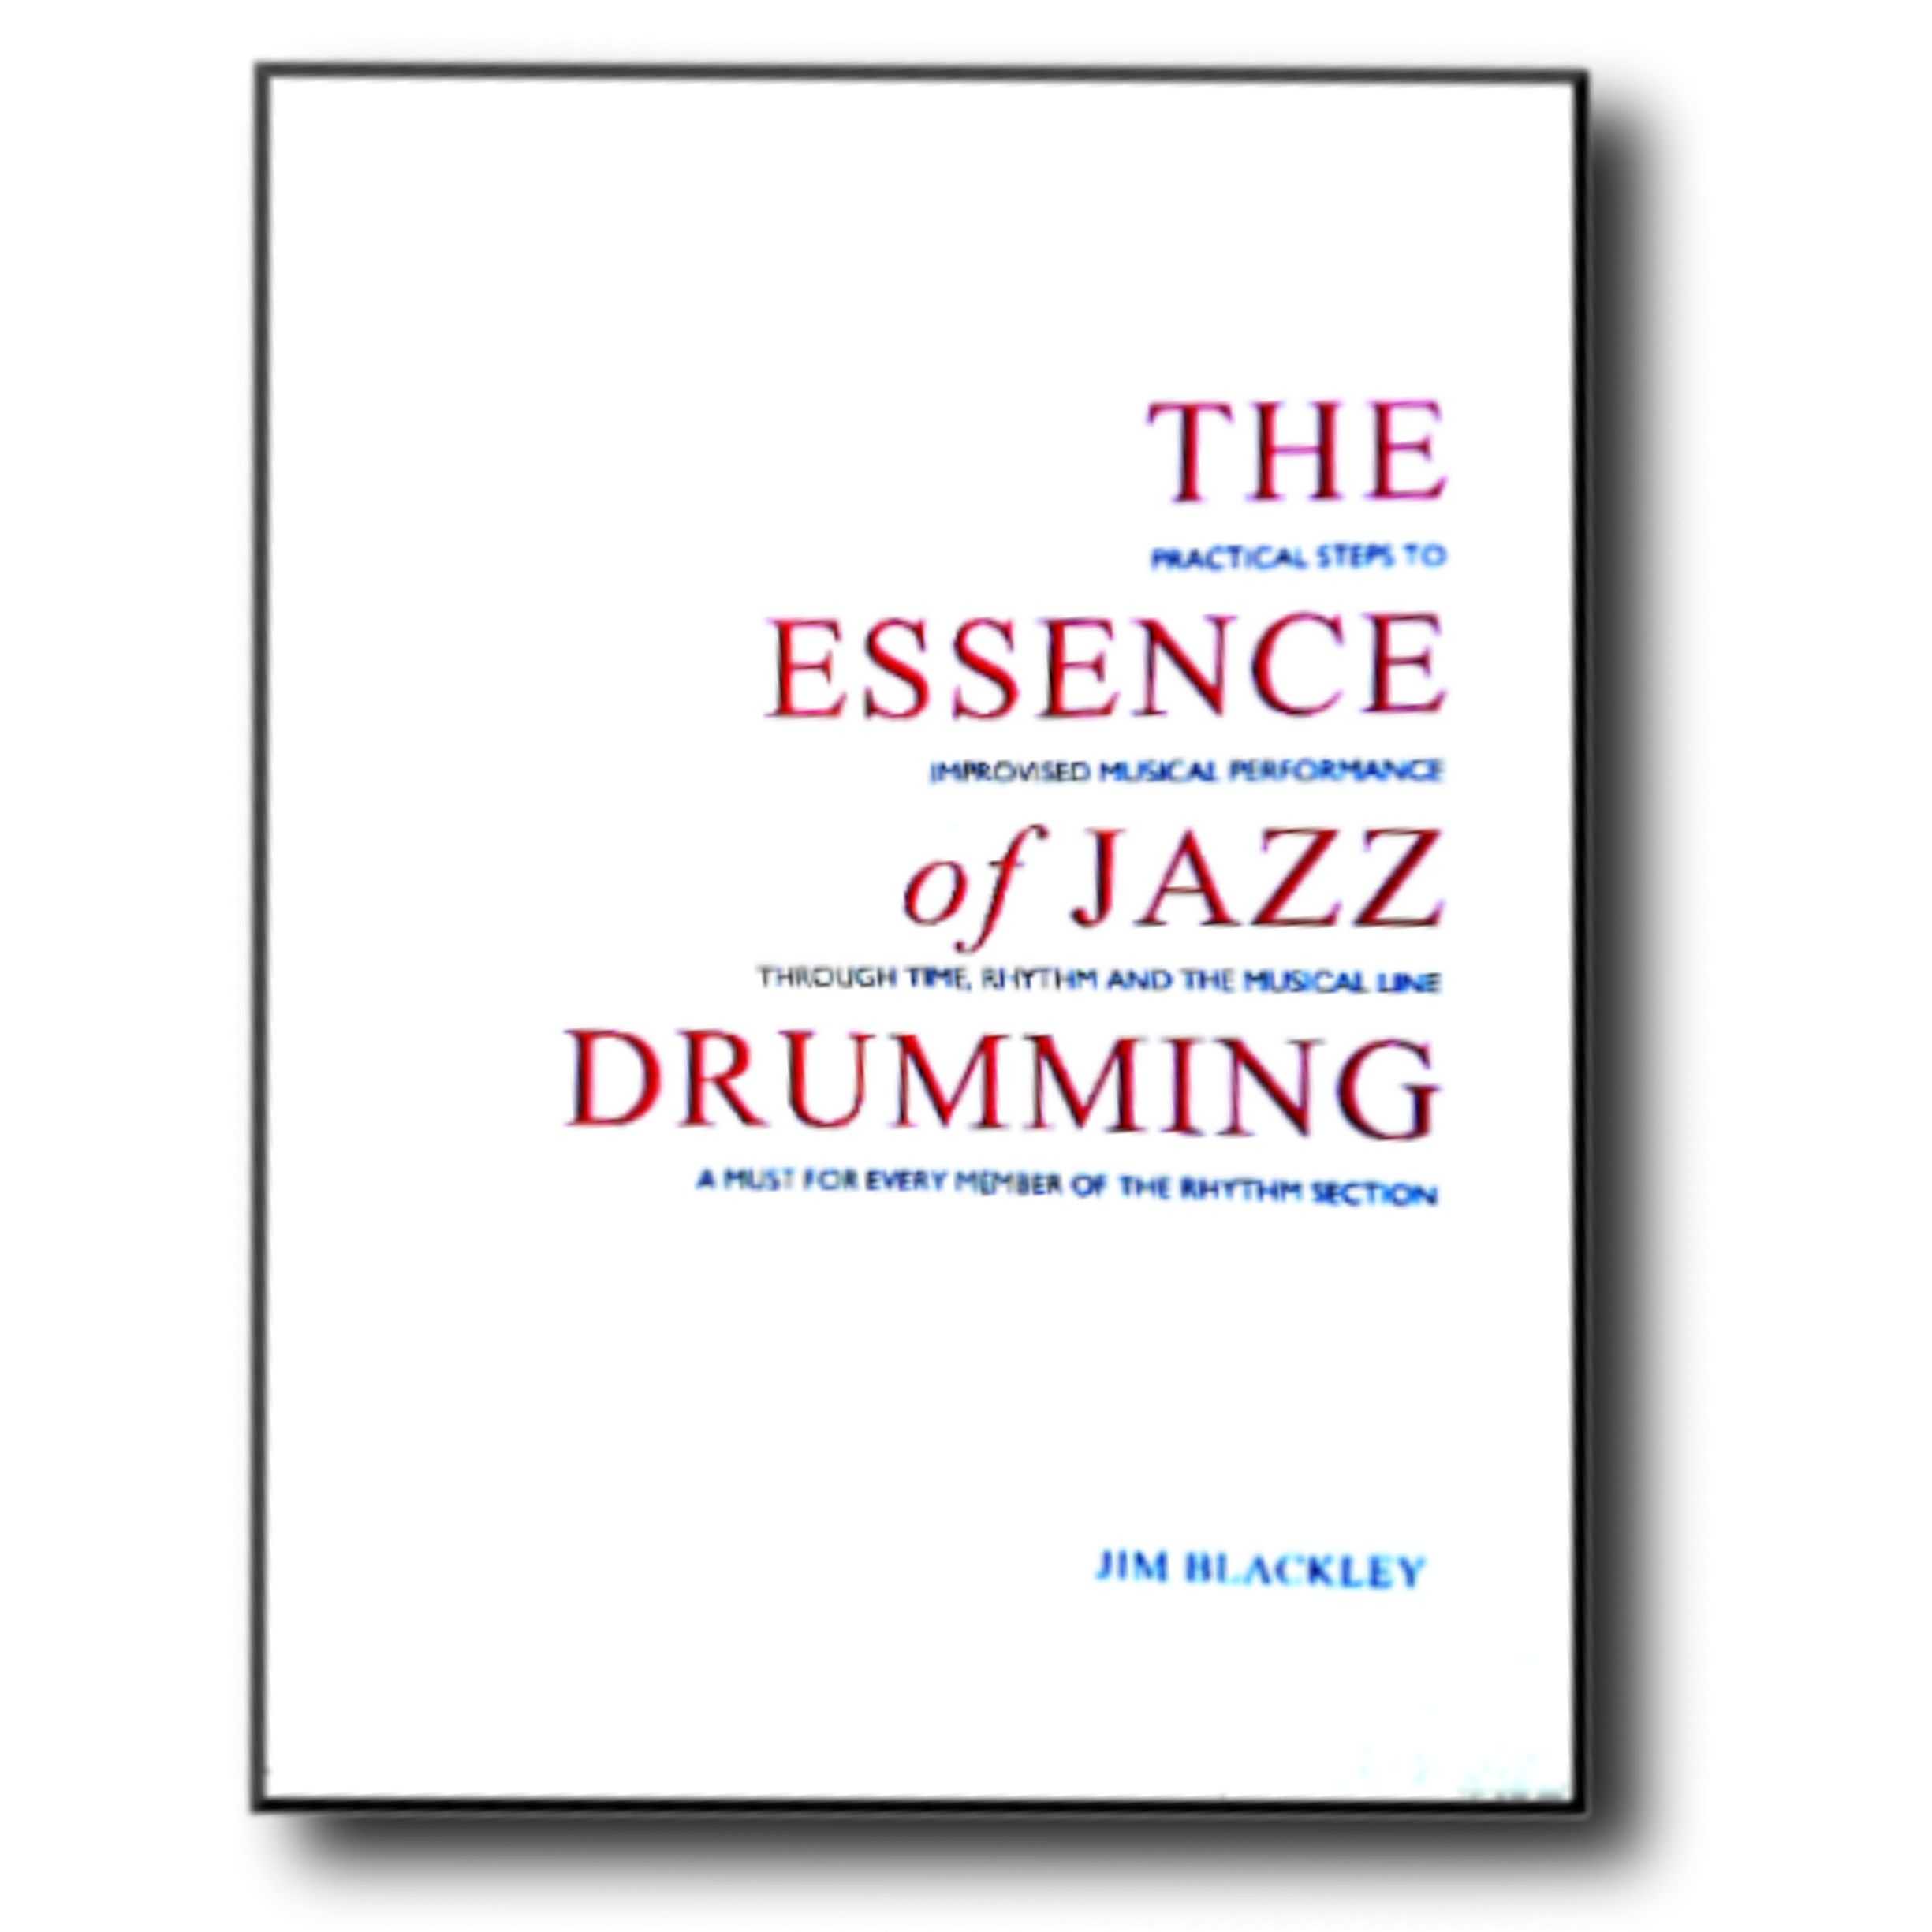 The Essence of Jazz Drumming by Jim Blackley